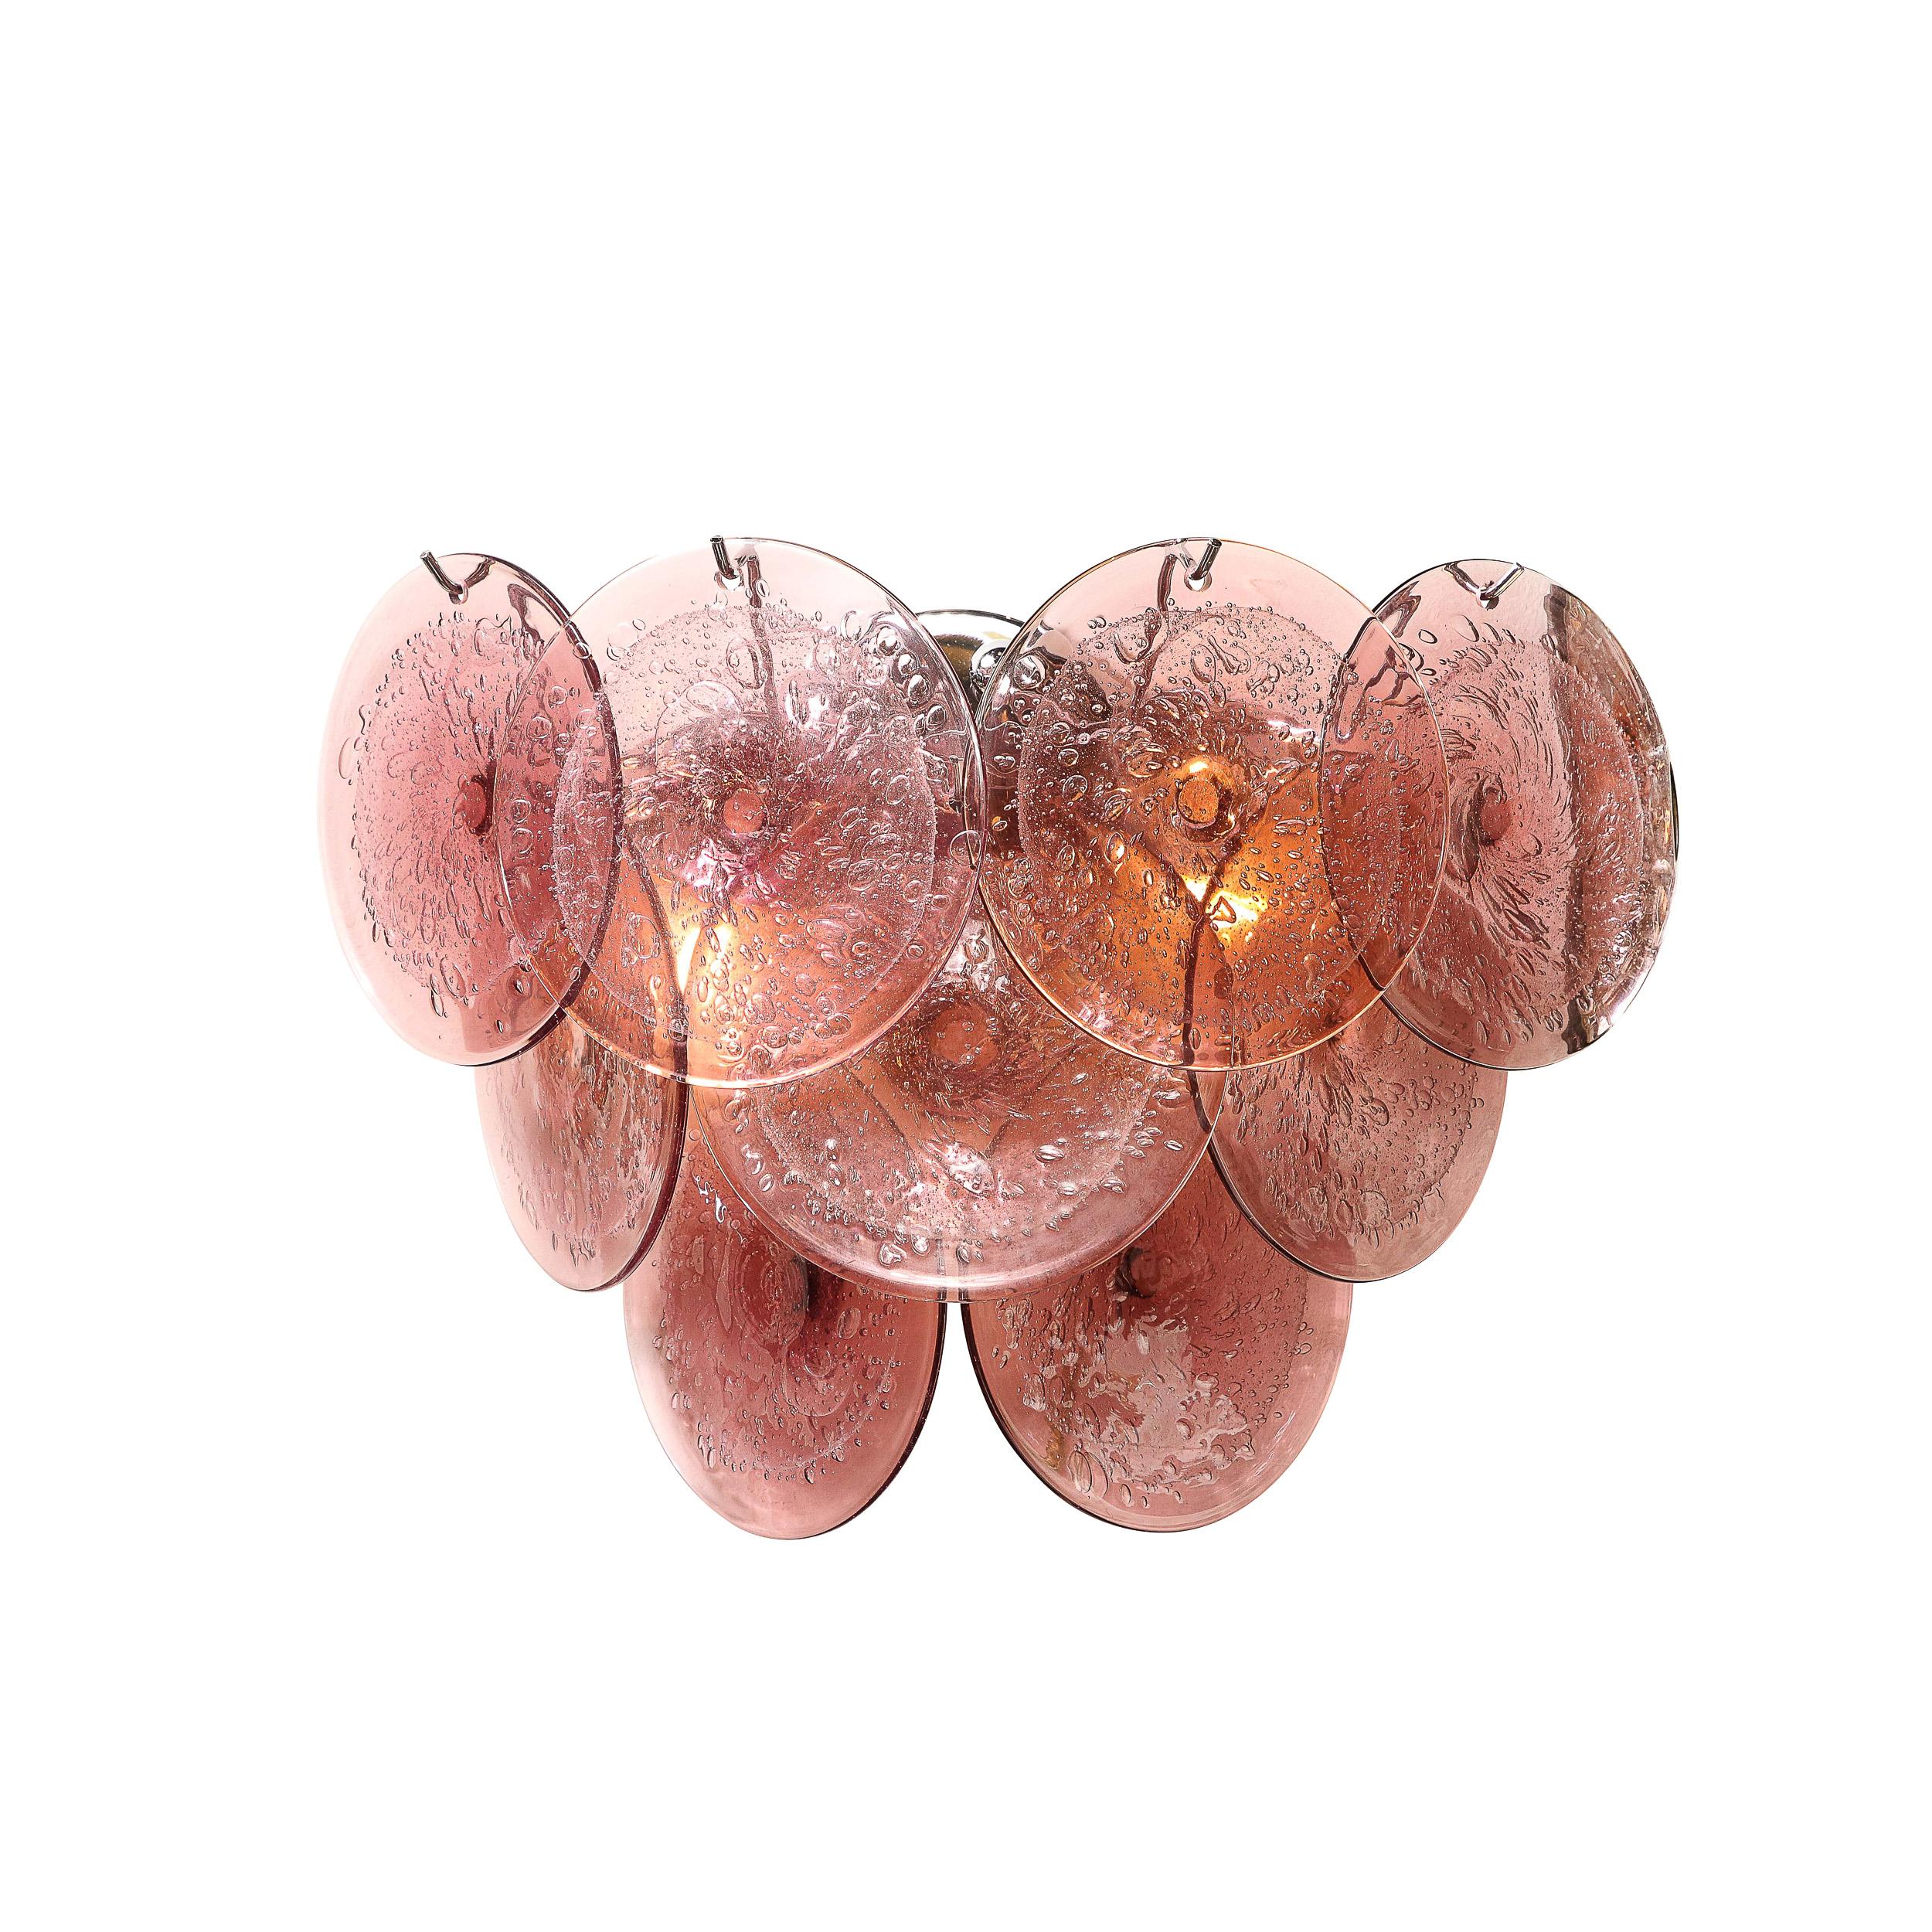 This elegant pair of modernist sconces were realized in Murano, Italy- the island off the coast of Venice renowned for centuries for its superlative glass production. They feature nine discs each suspended from a lustrous polished chrome frame. Each